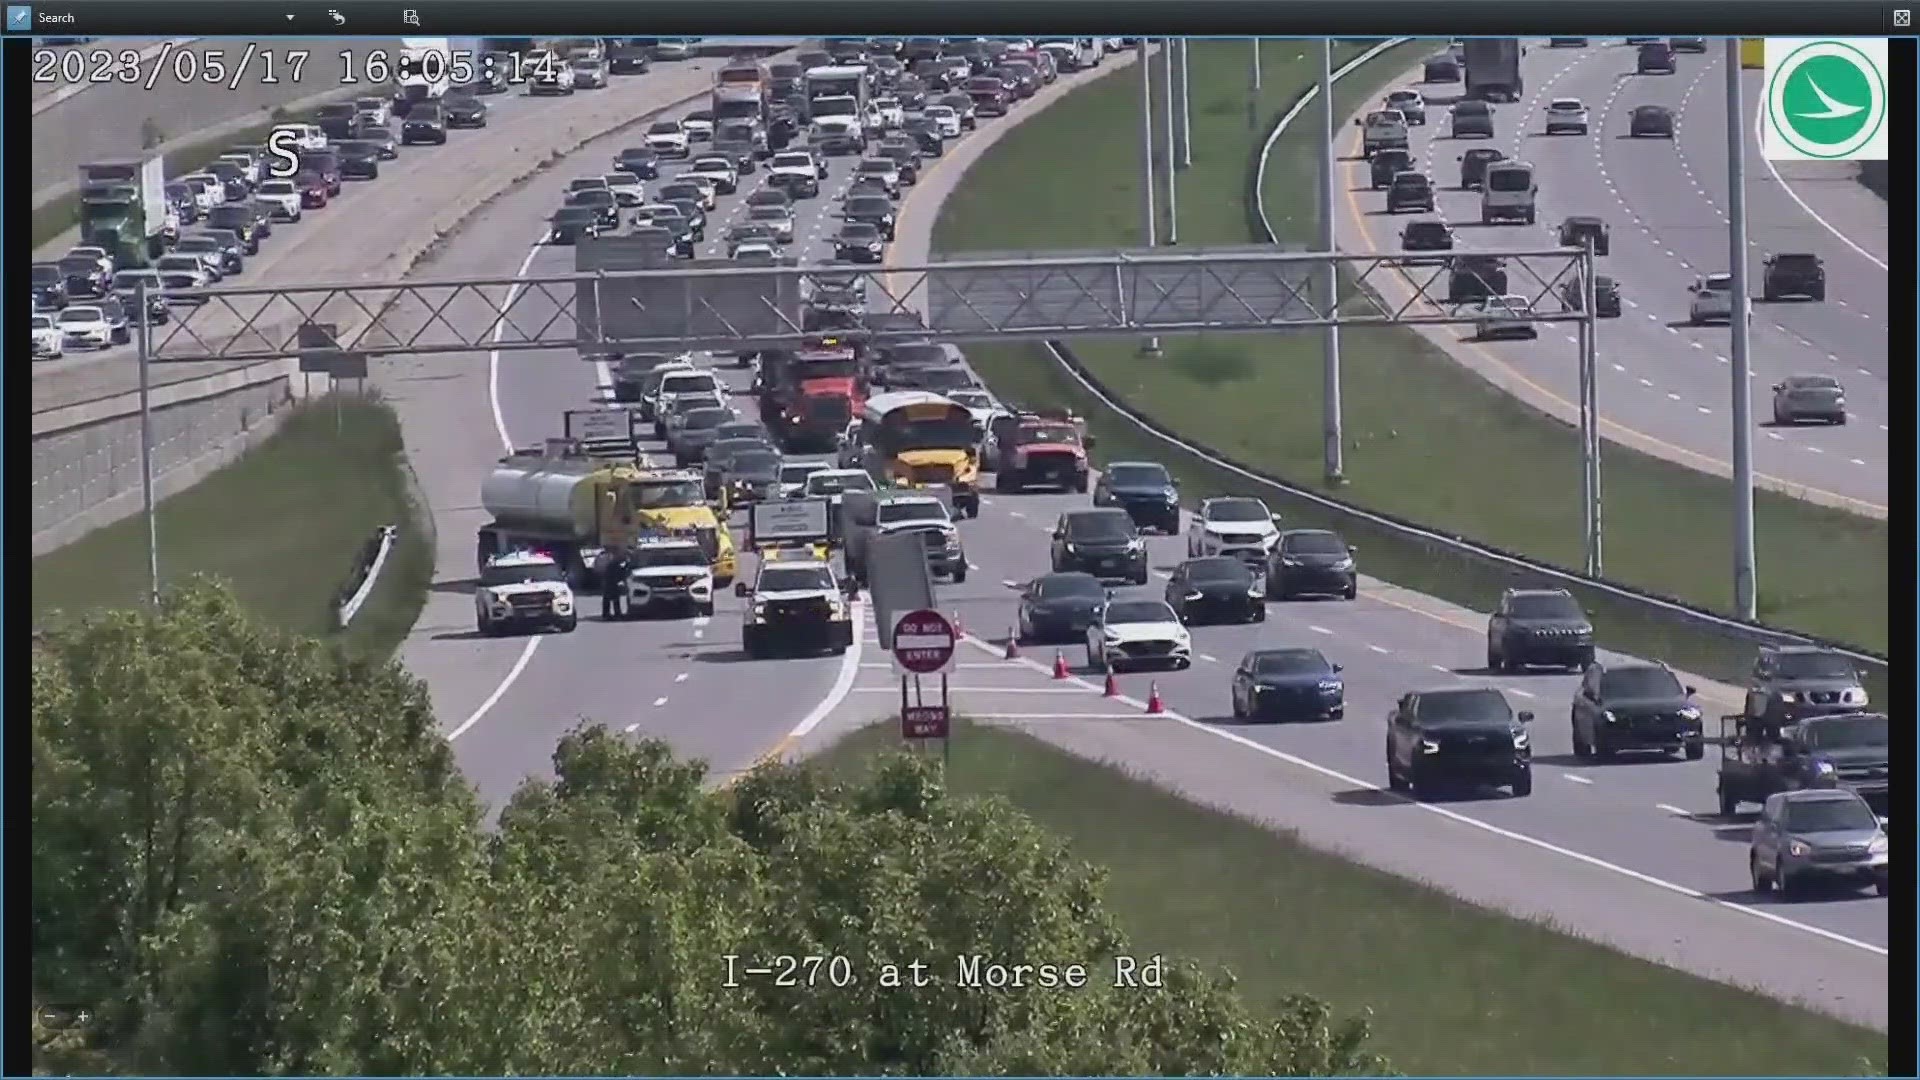 Traffic is stopped on Morse Road and slowed down on Interstate 270 due to a gas leak.